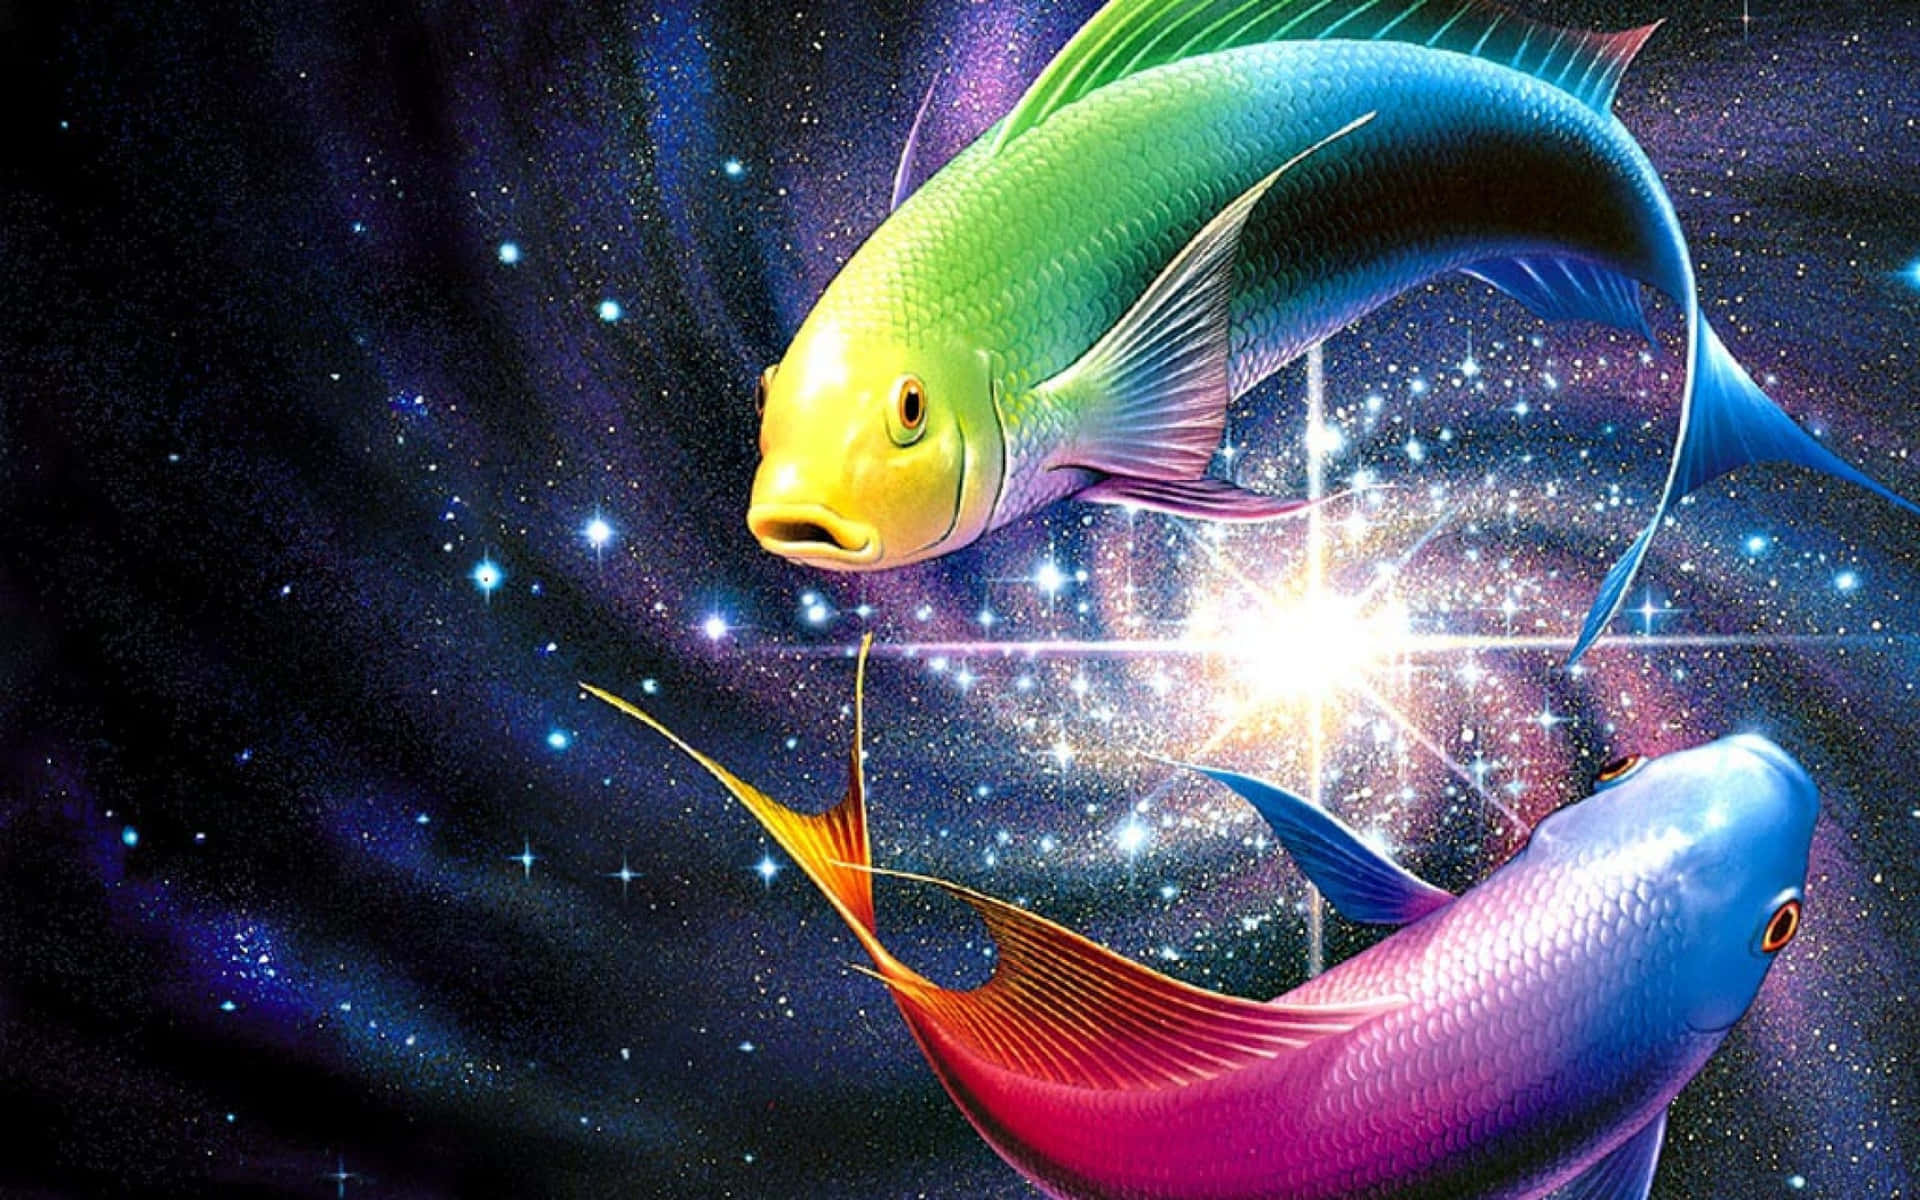 Pisces, the twelfth astrological sign of the zodiac